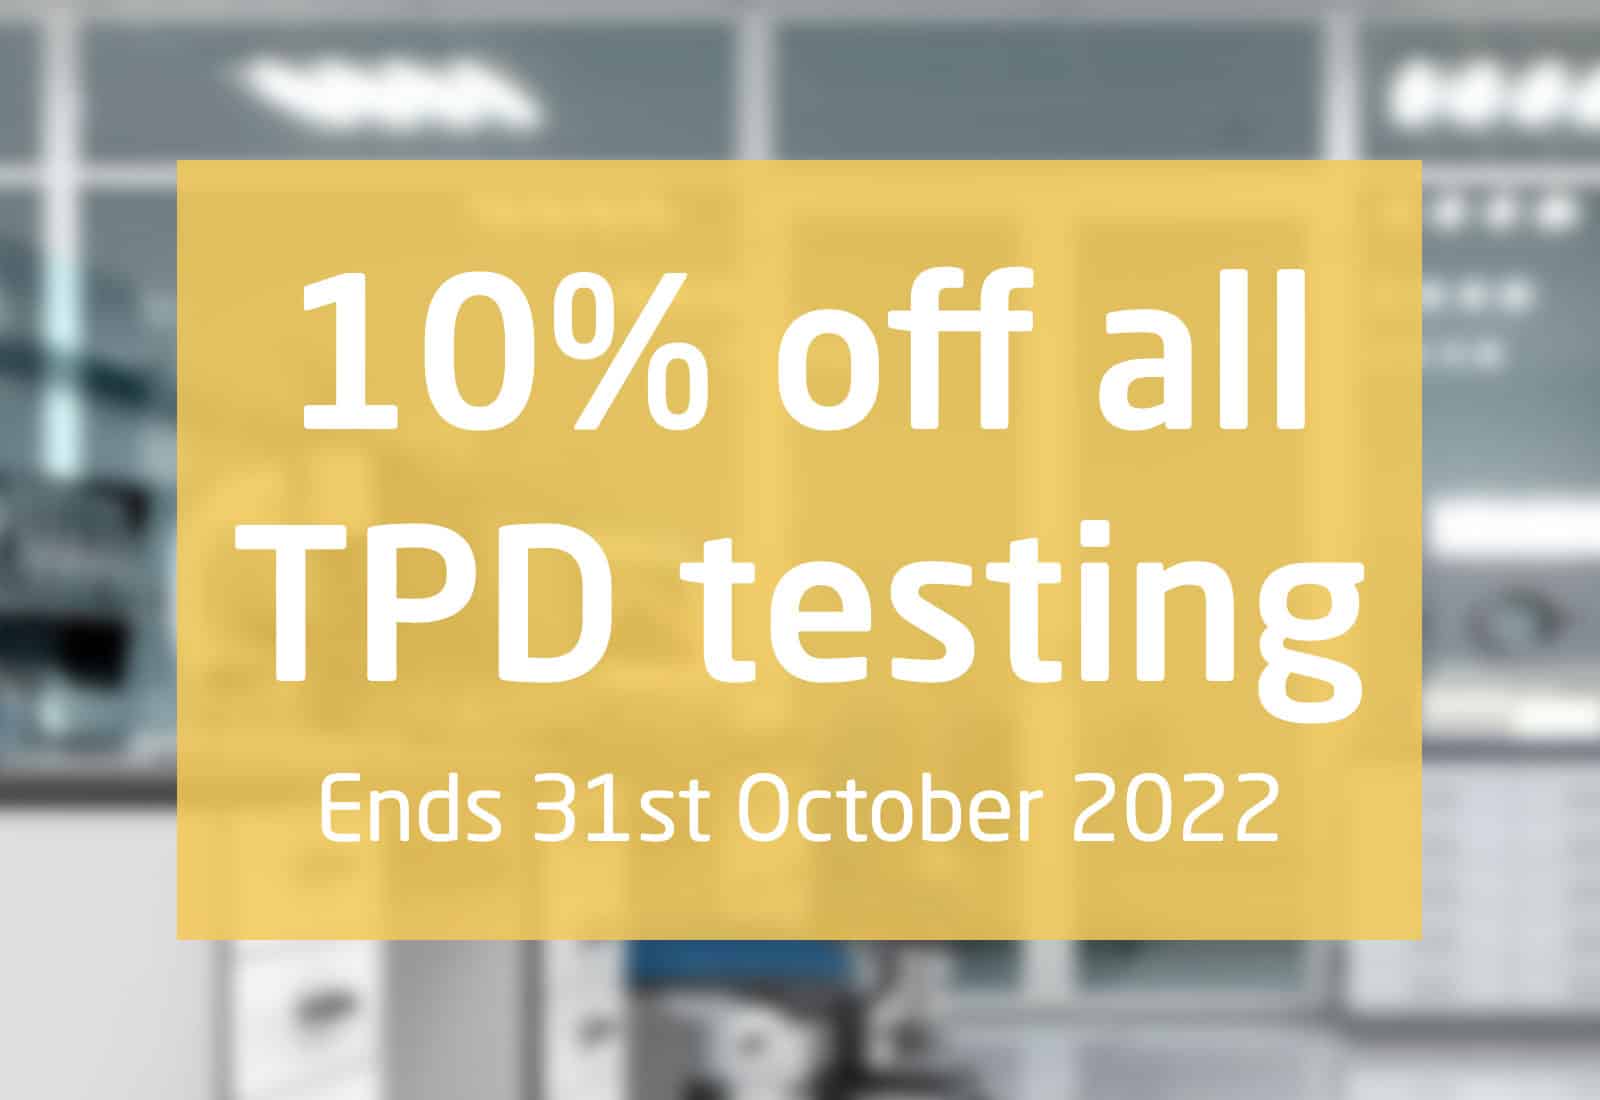 Your last chance to get 10% off all TPD testing services